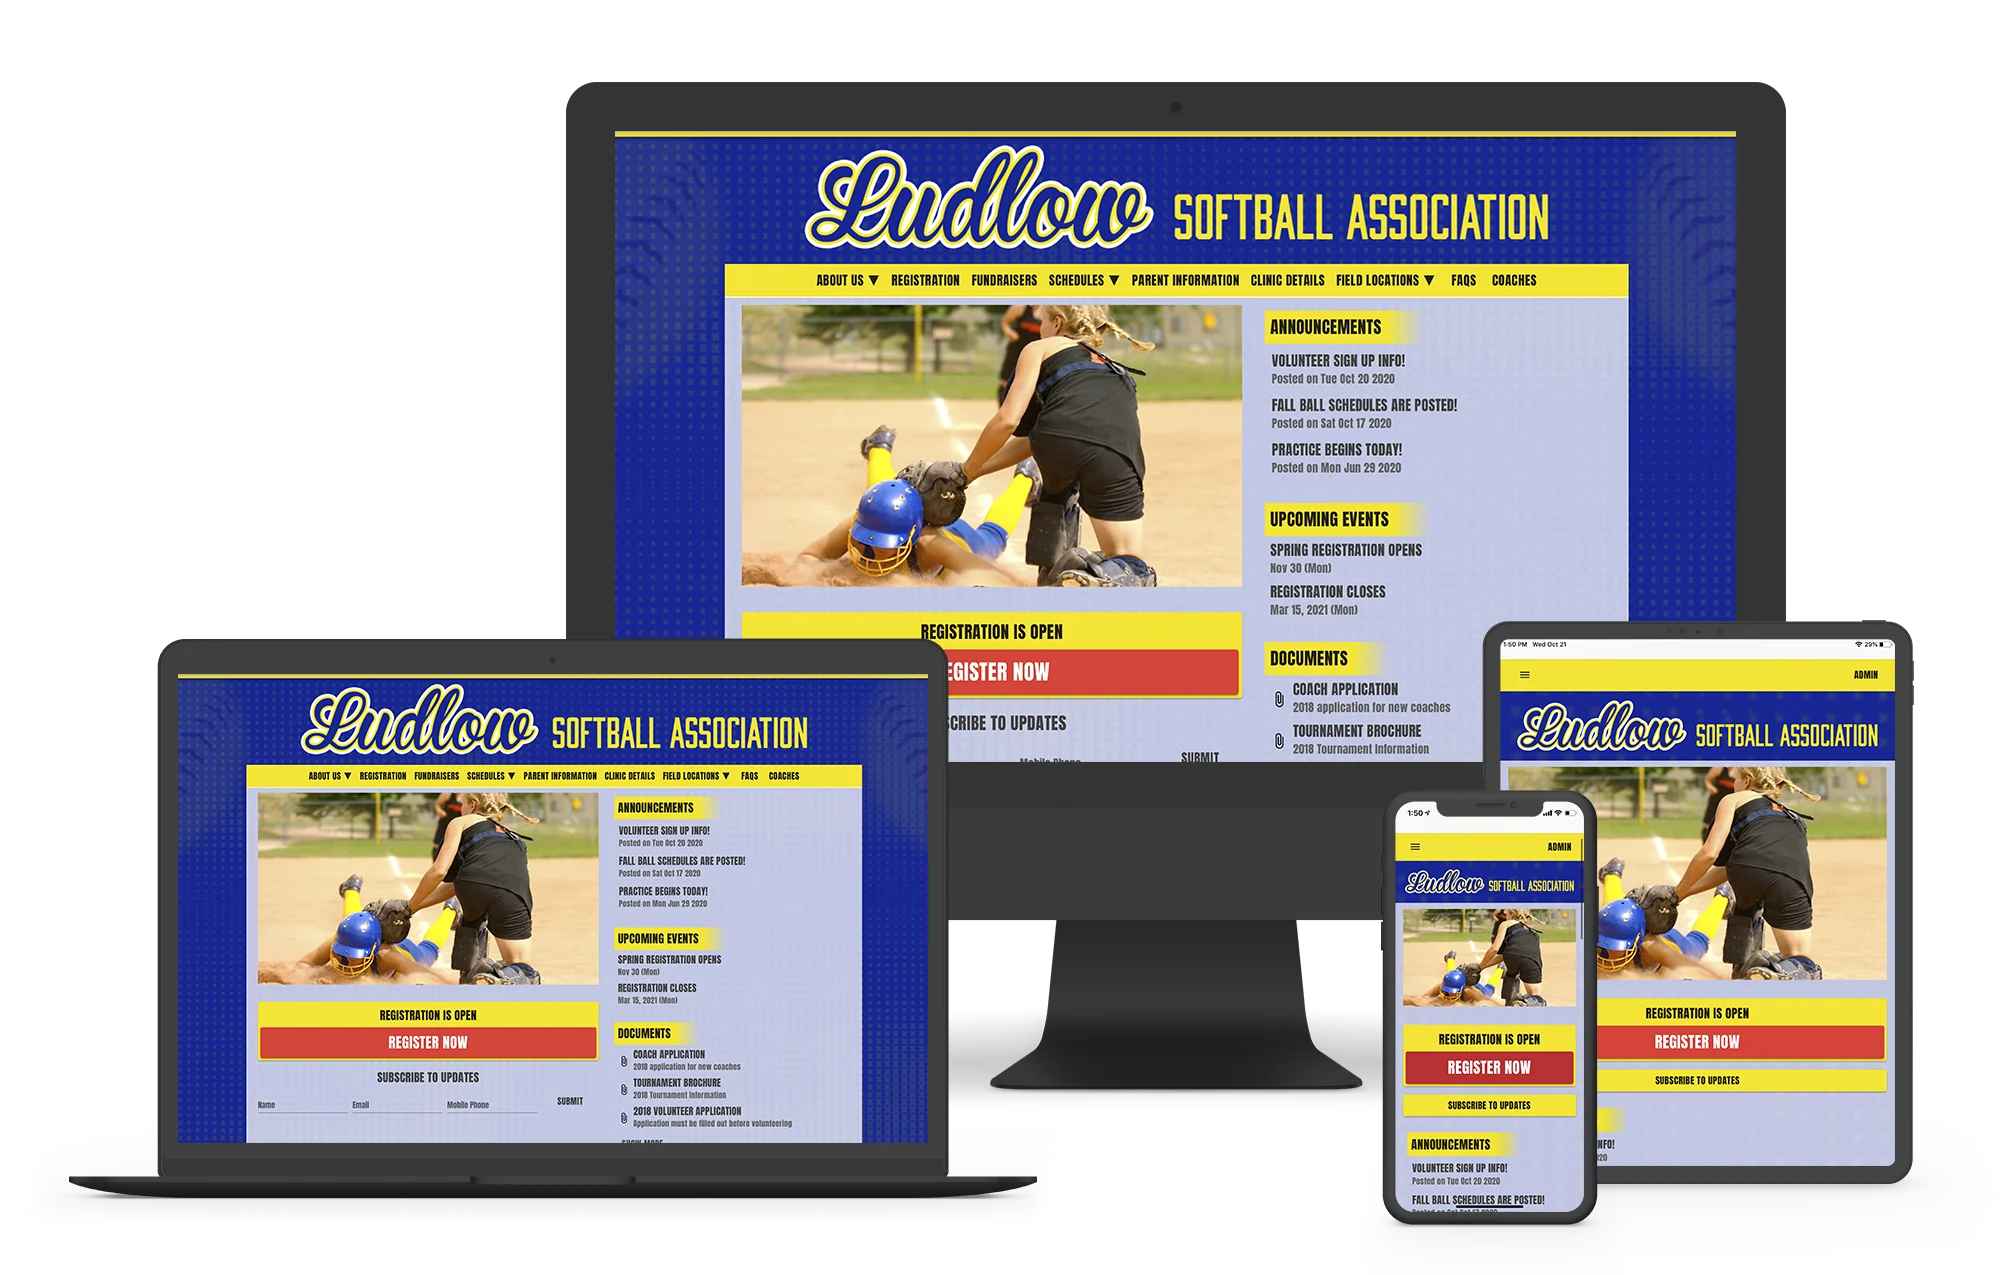 a softball website builder with online registration and scheduling